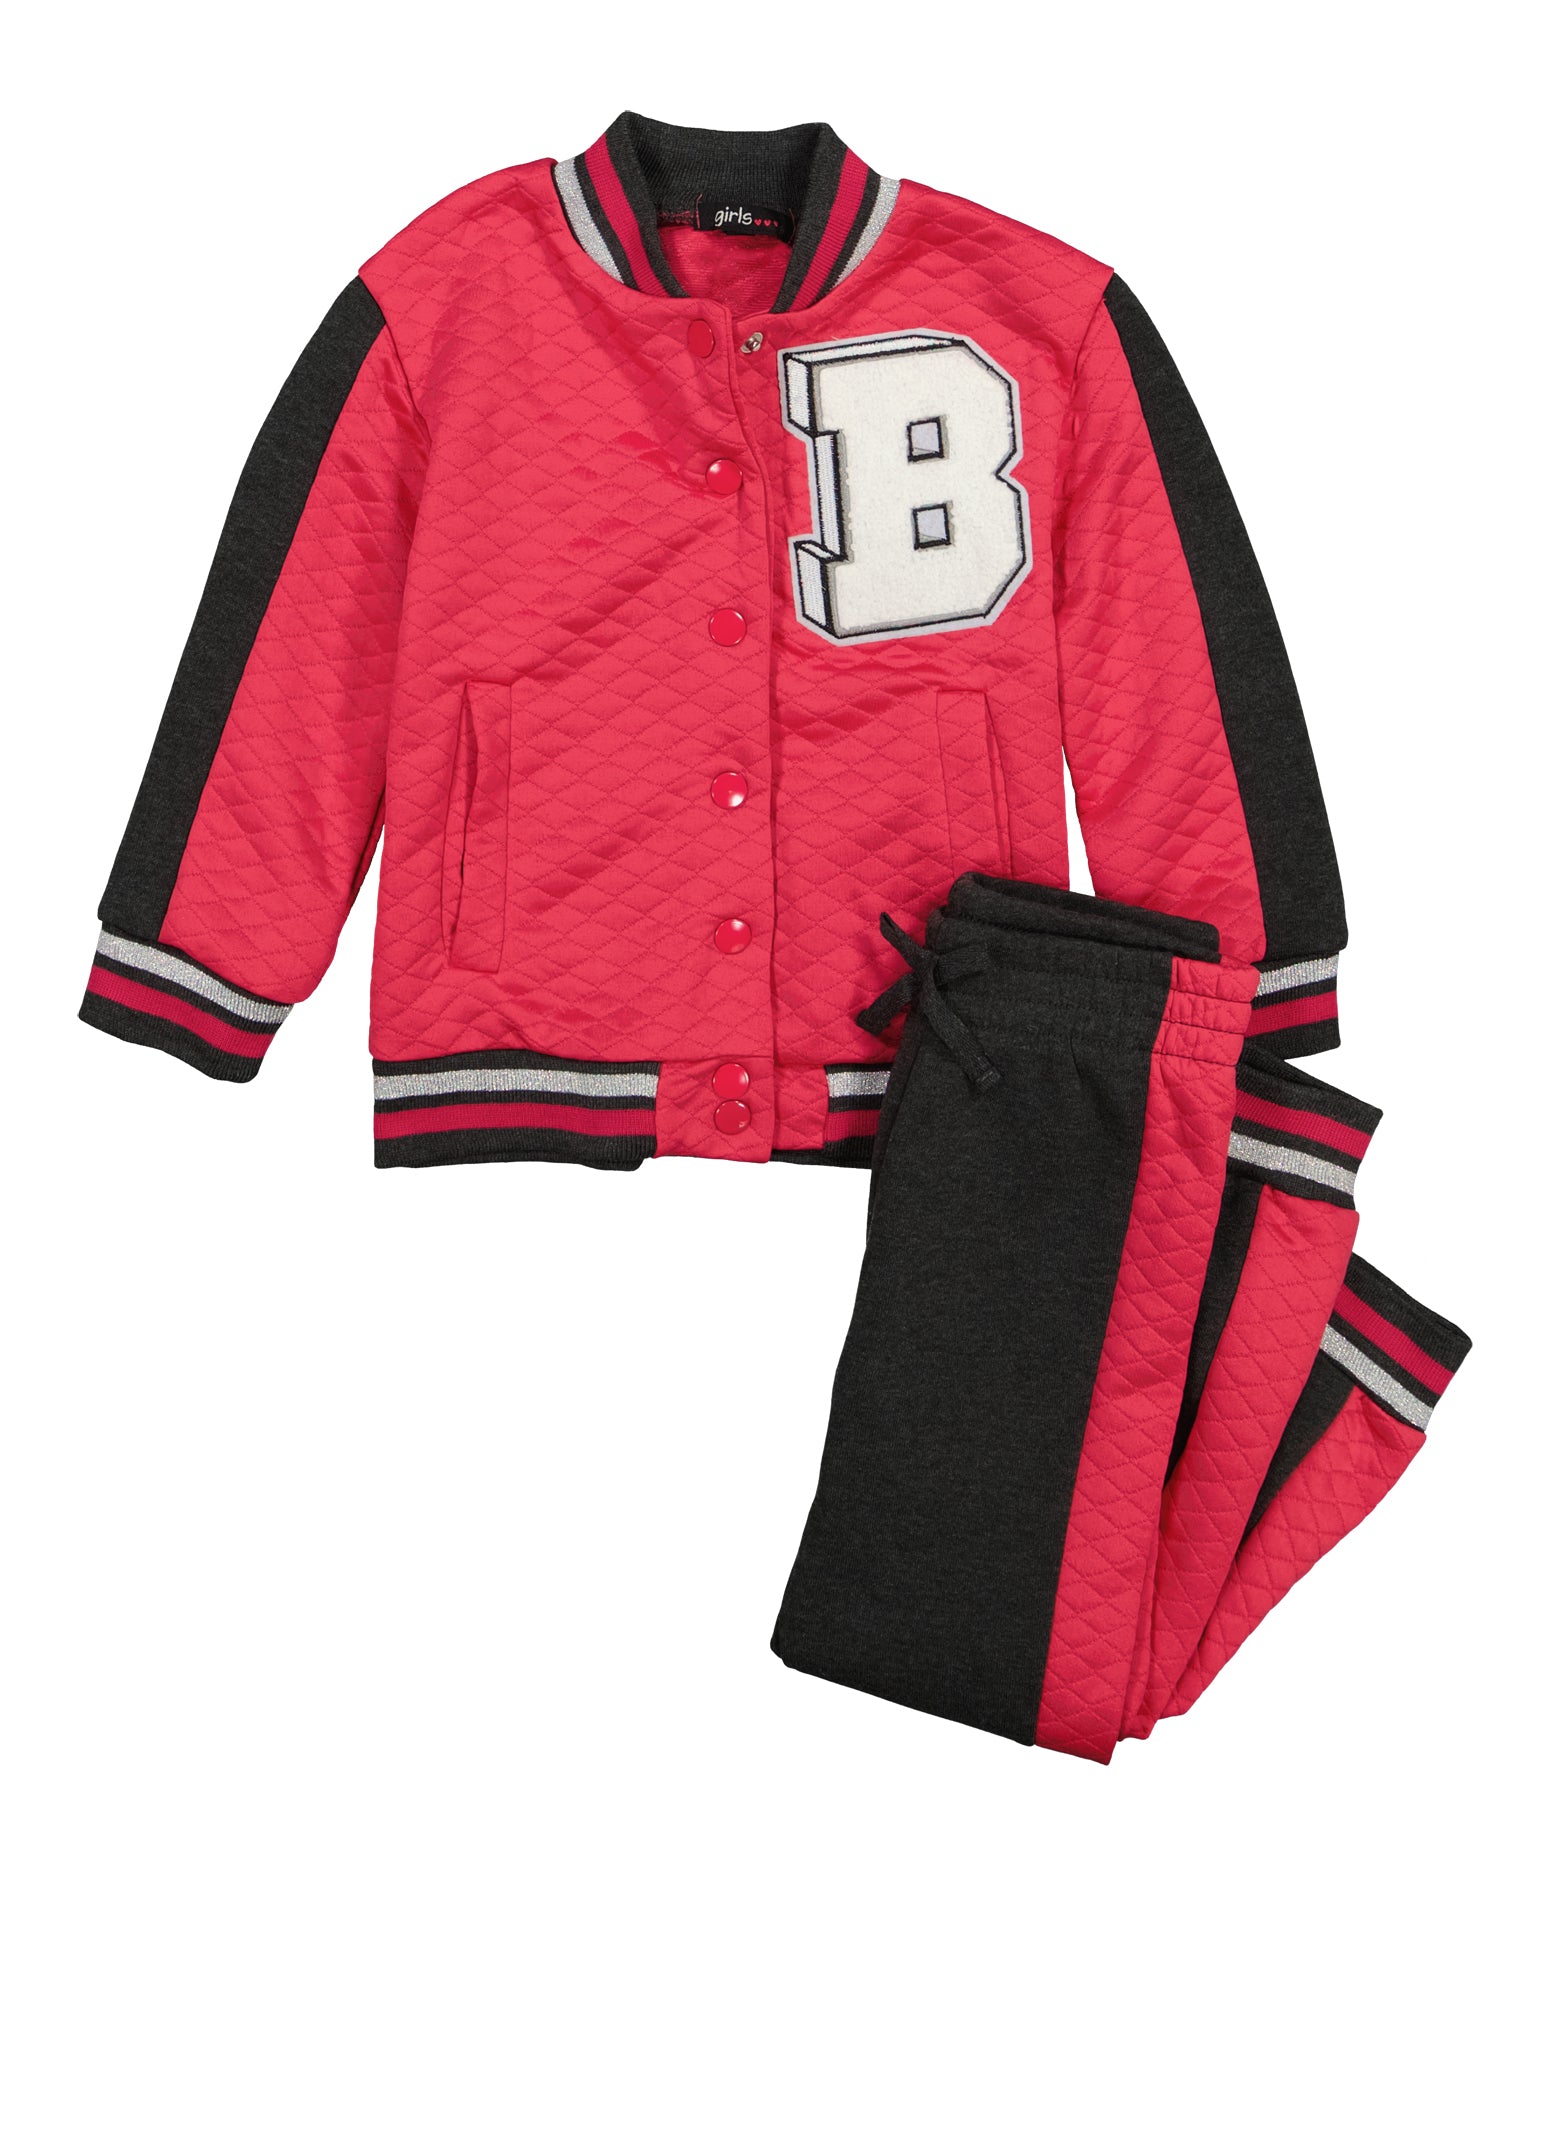 Little Girls B Initial Patch Varsity Jacket and Joggers, Pink, Size 4